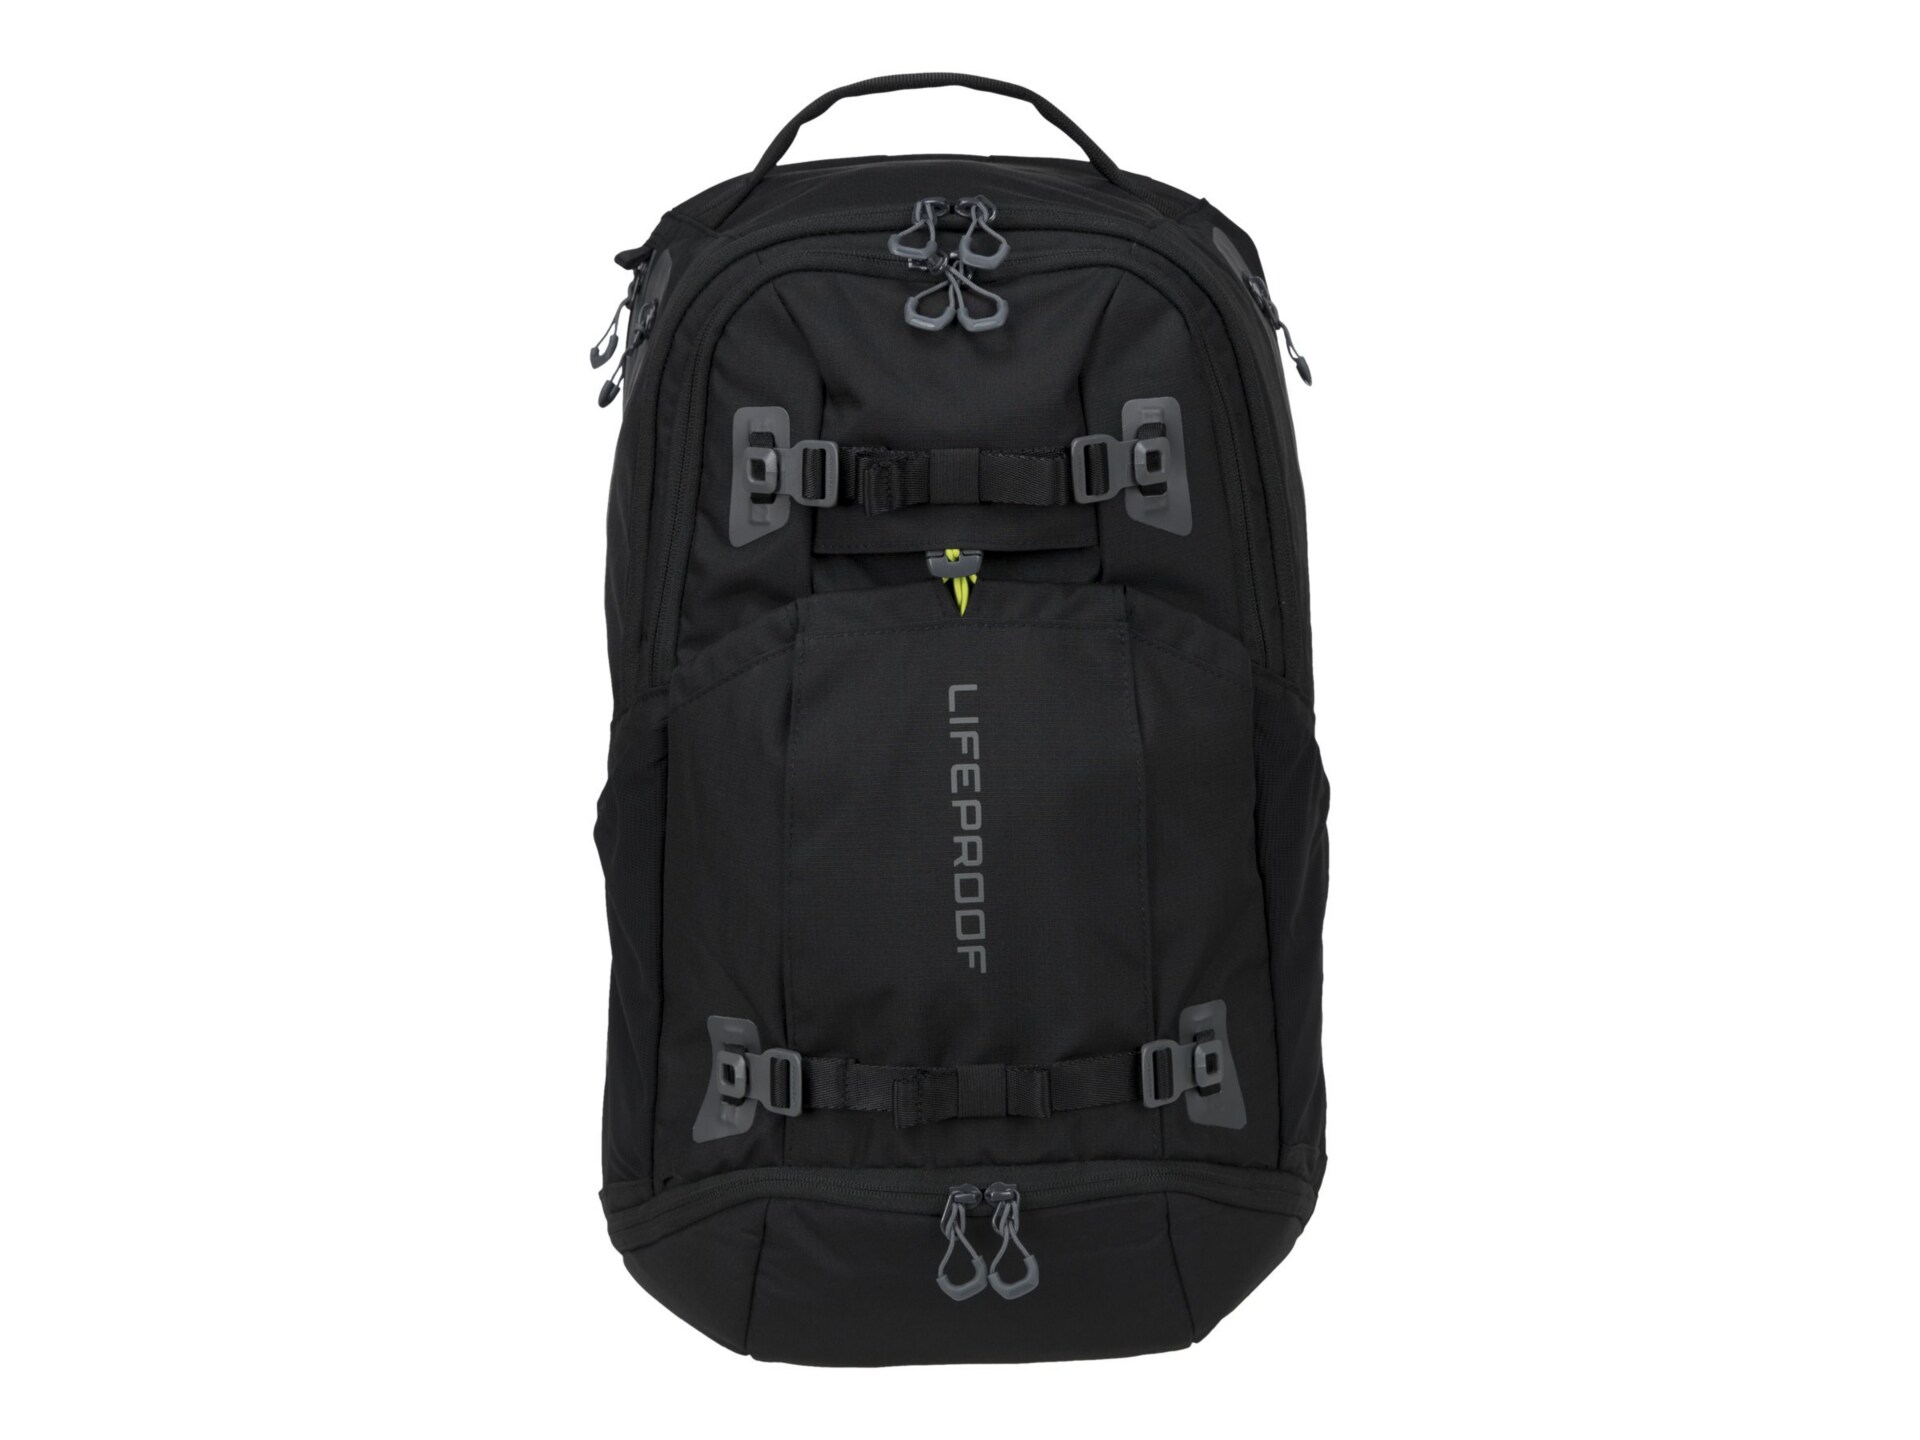 Lifeproof Squamish XL notebook carrying backpack